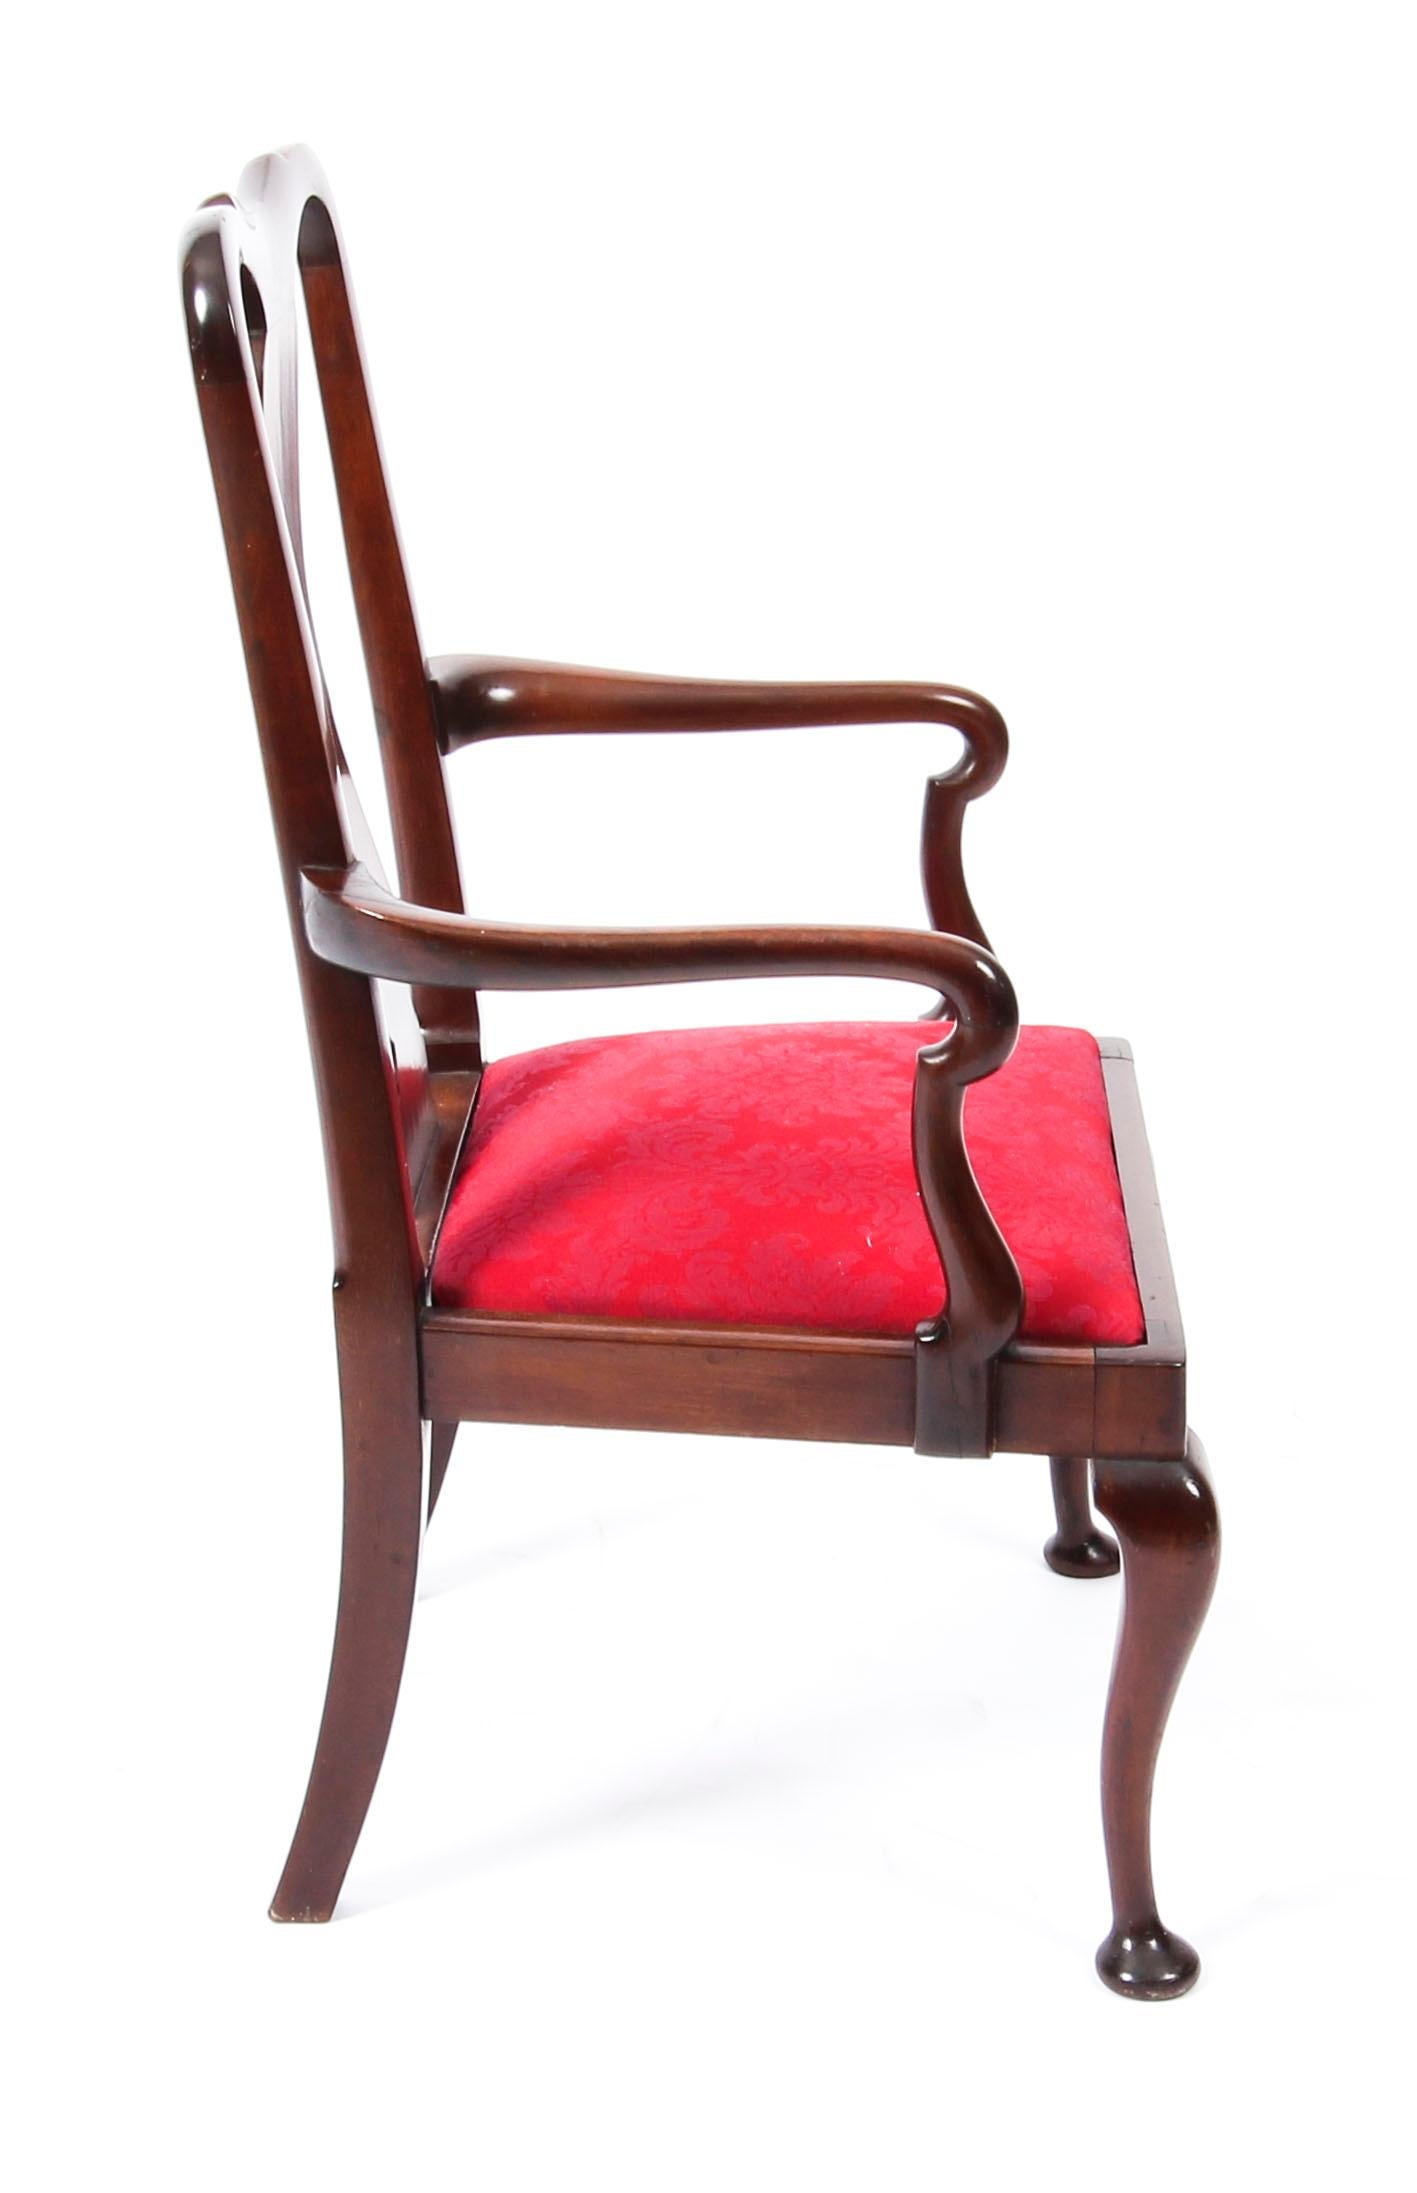 Early 20th Century Queen Anne Revival Mahogany Child's Chair For Sale 2